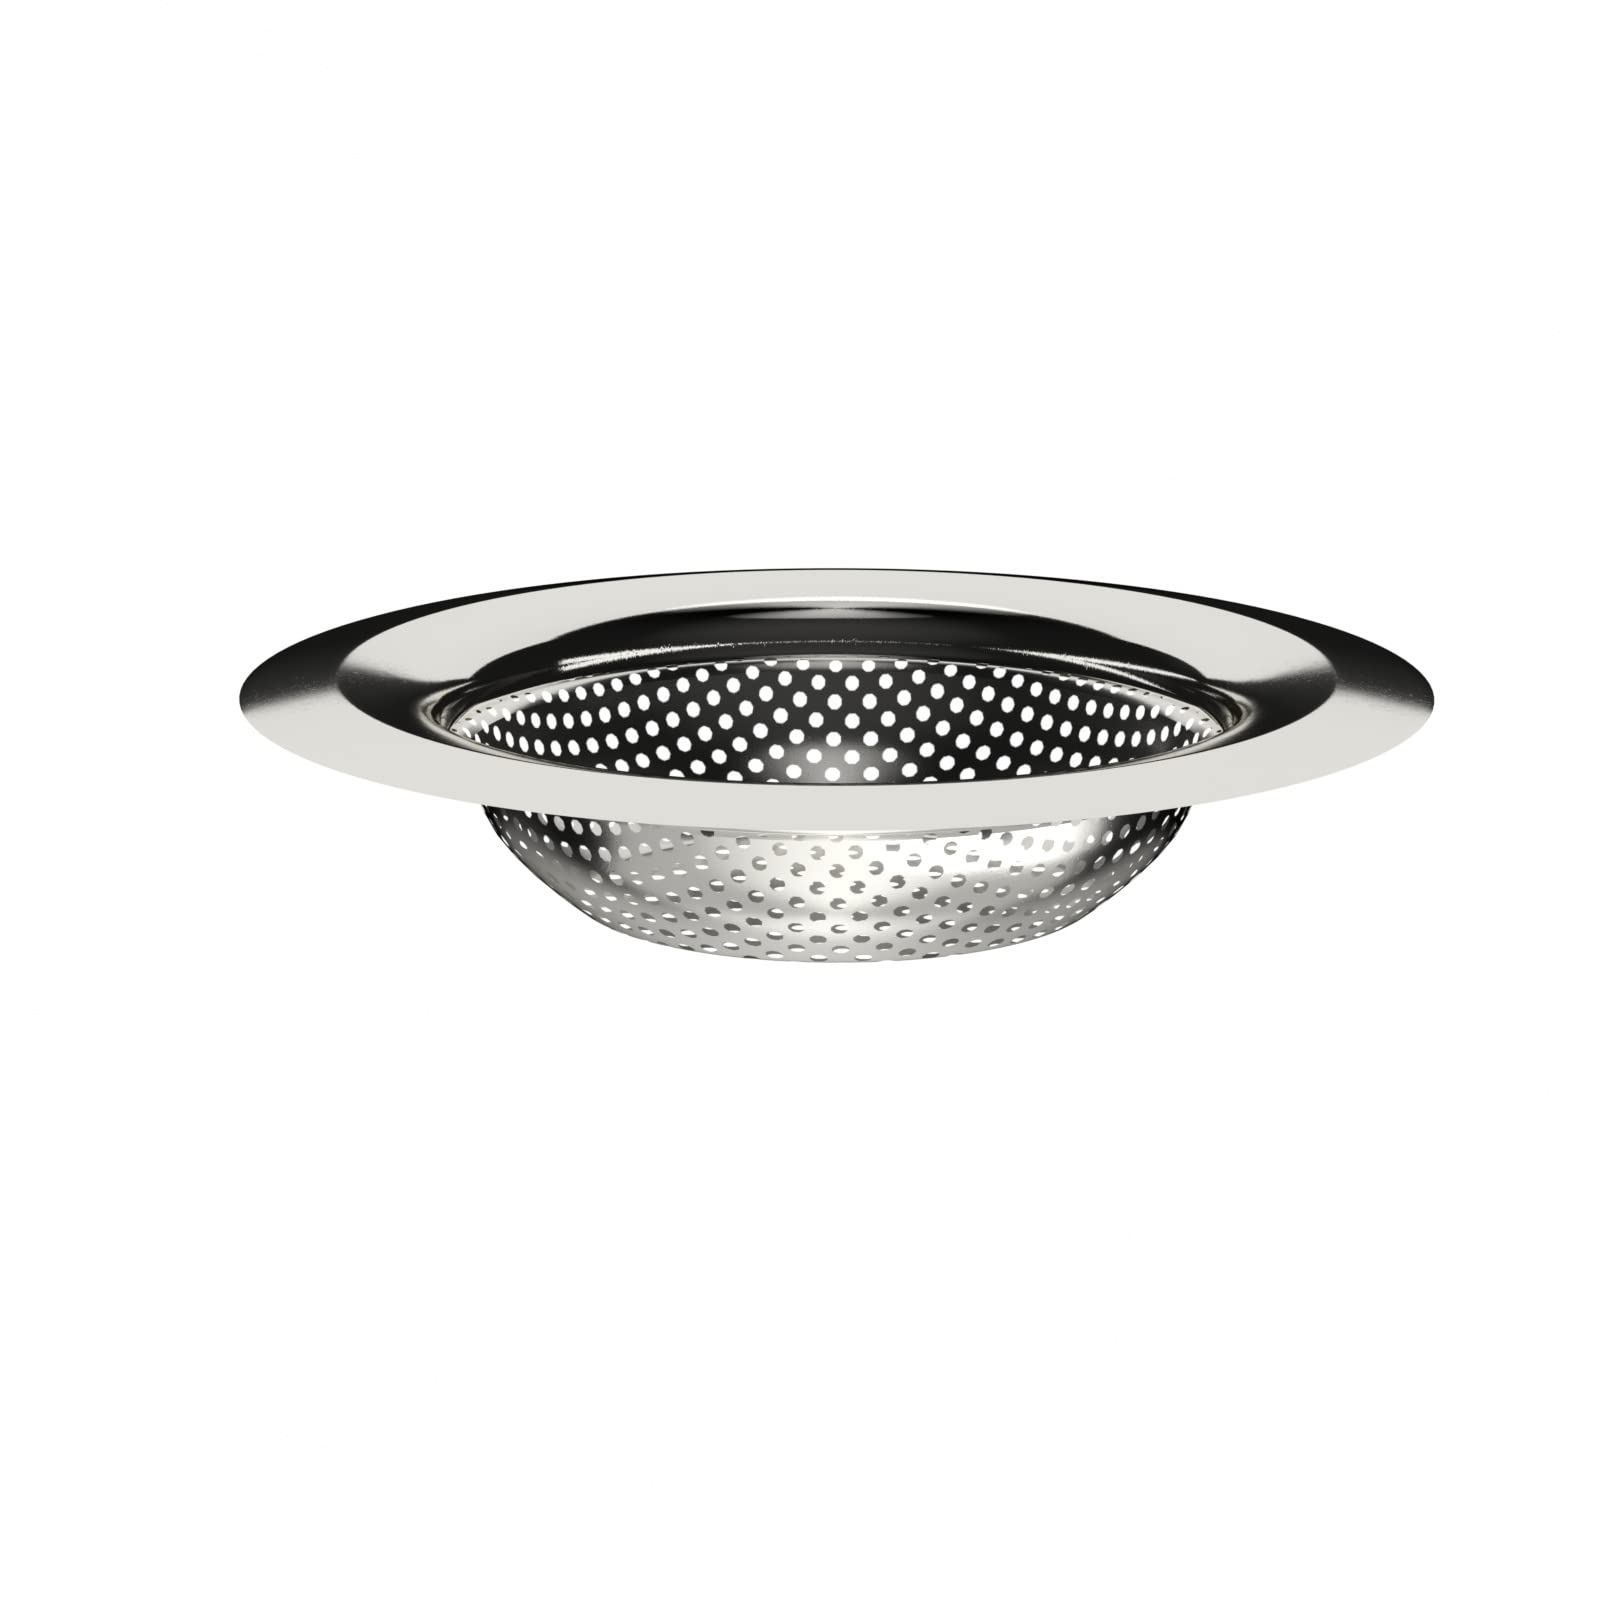 SlimmKISS Sink Grid and Sink Protectors for Kitchen Sink,Sink Rack for Bottom of Sink Stainless Steel Sink Grid Corner Radius Sink Grate Rear Drain Hole with Sink Strainer